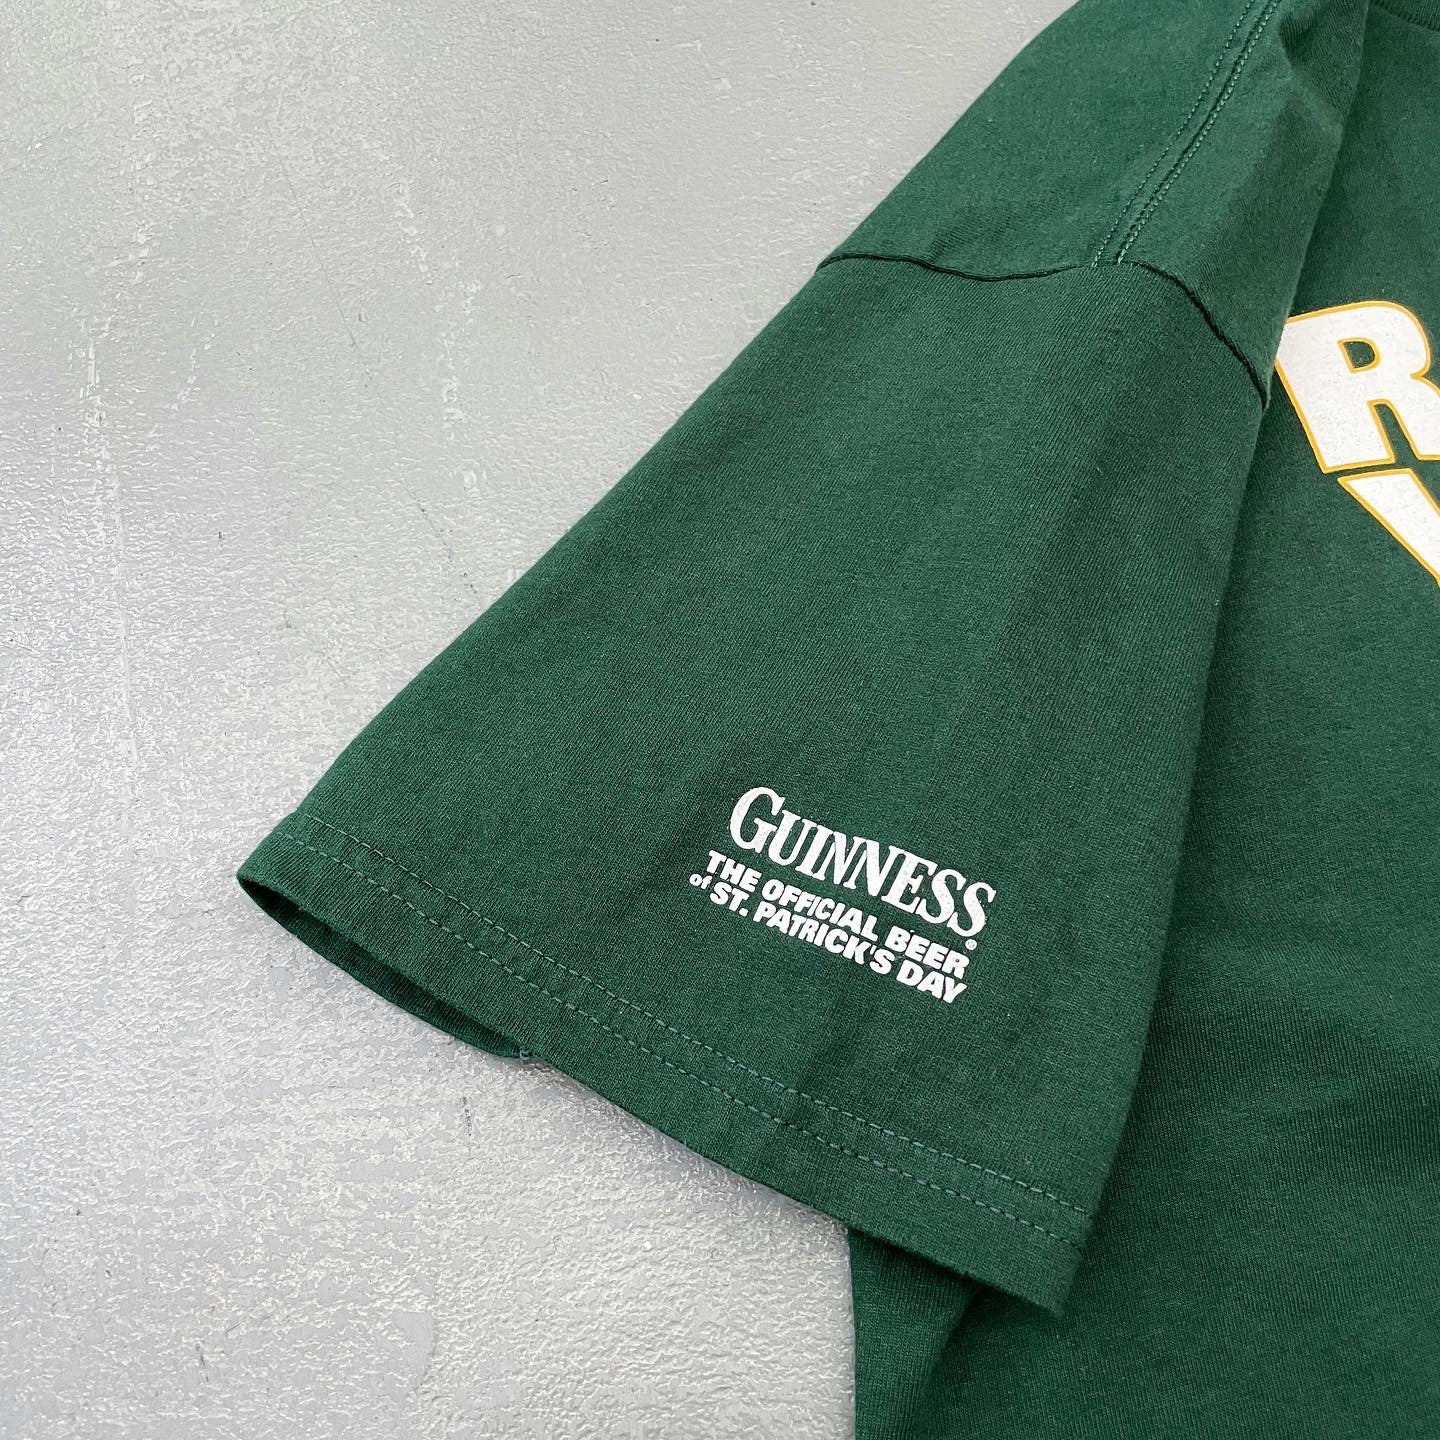 GUINNESS BEER for St. Patrick’s Day S/S Tee